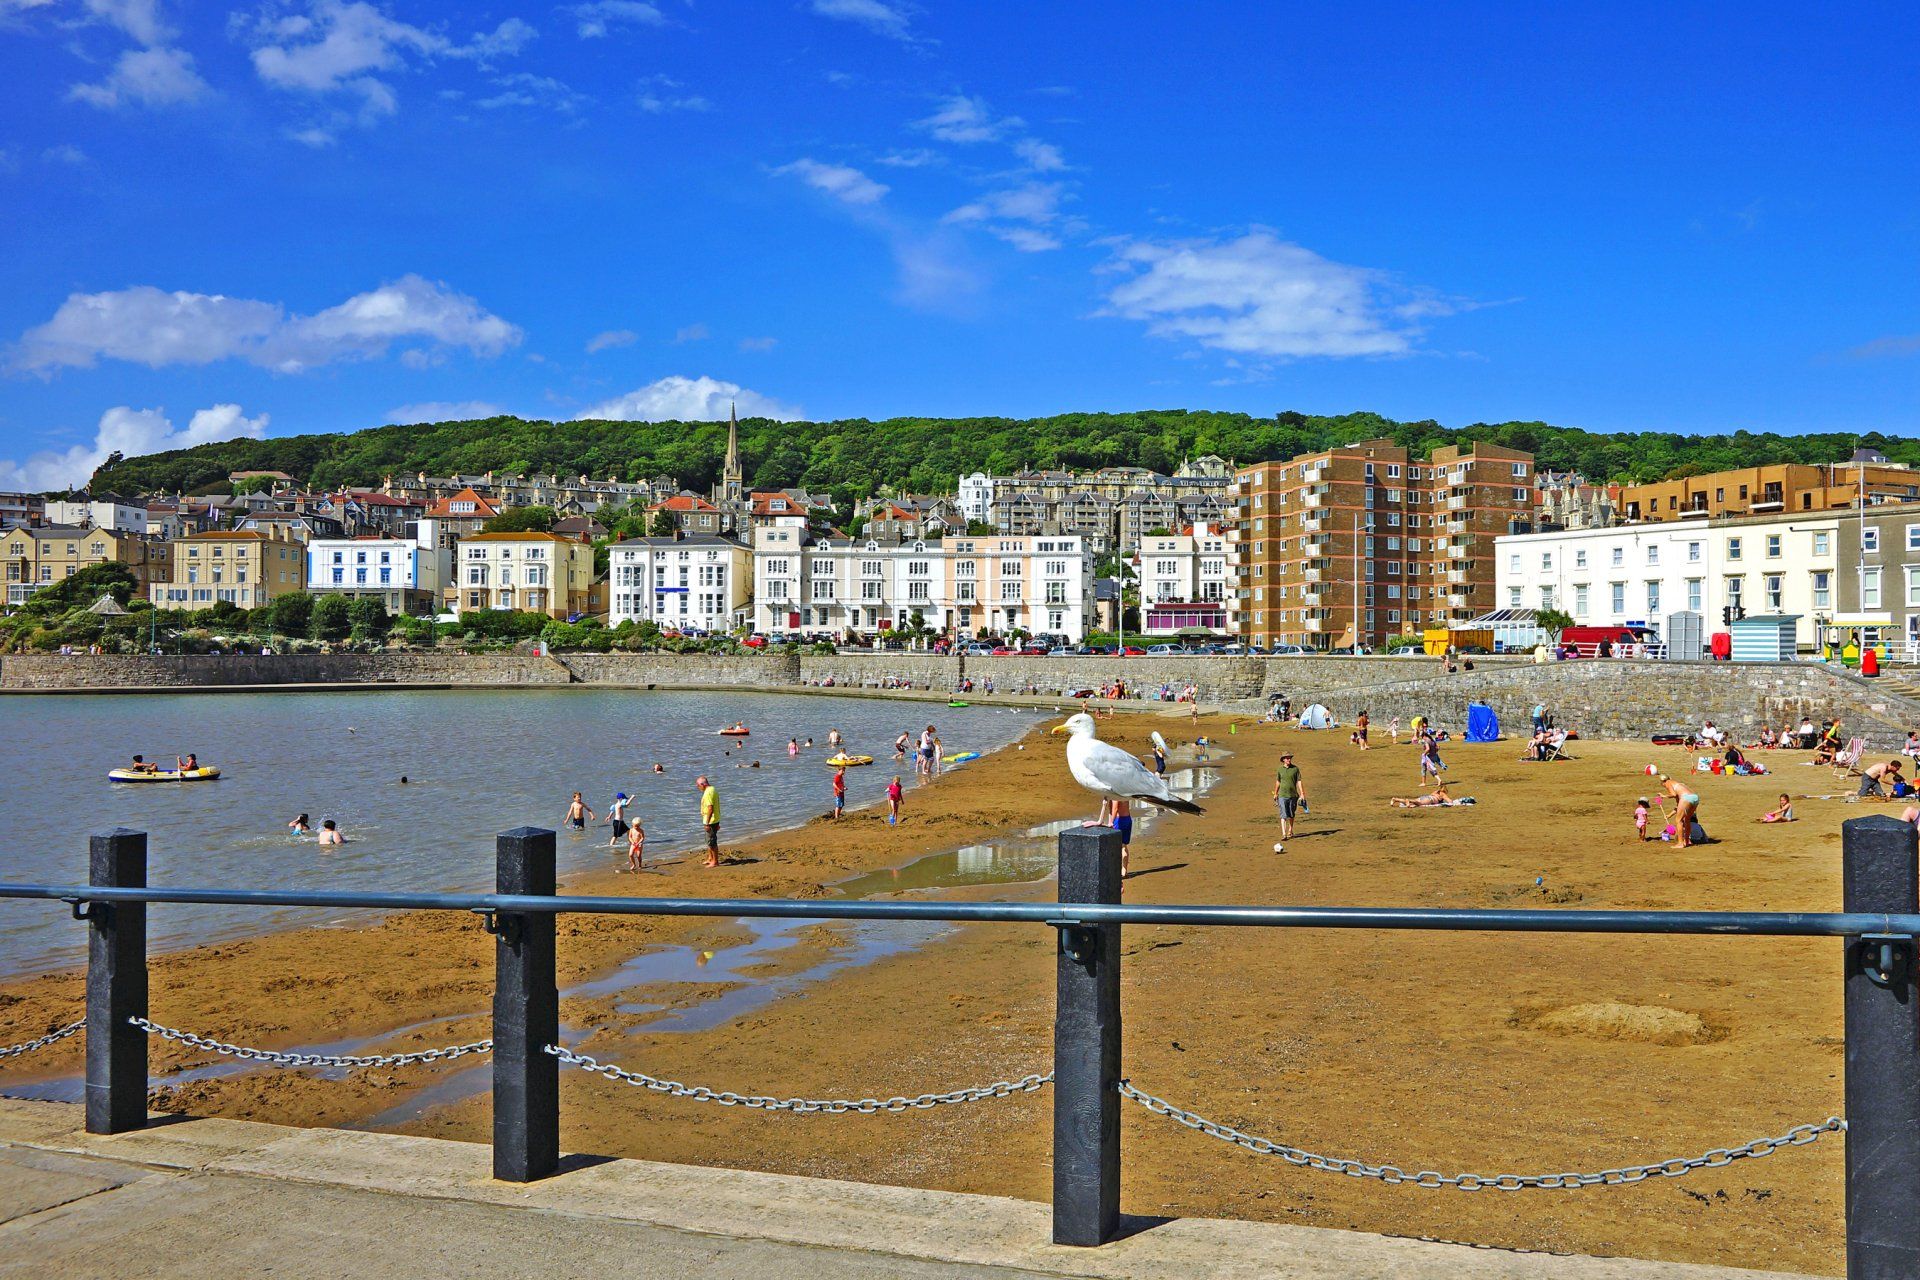 Marine Lake in Weston-super-Mare, near our family campsite and holiday park